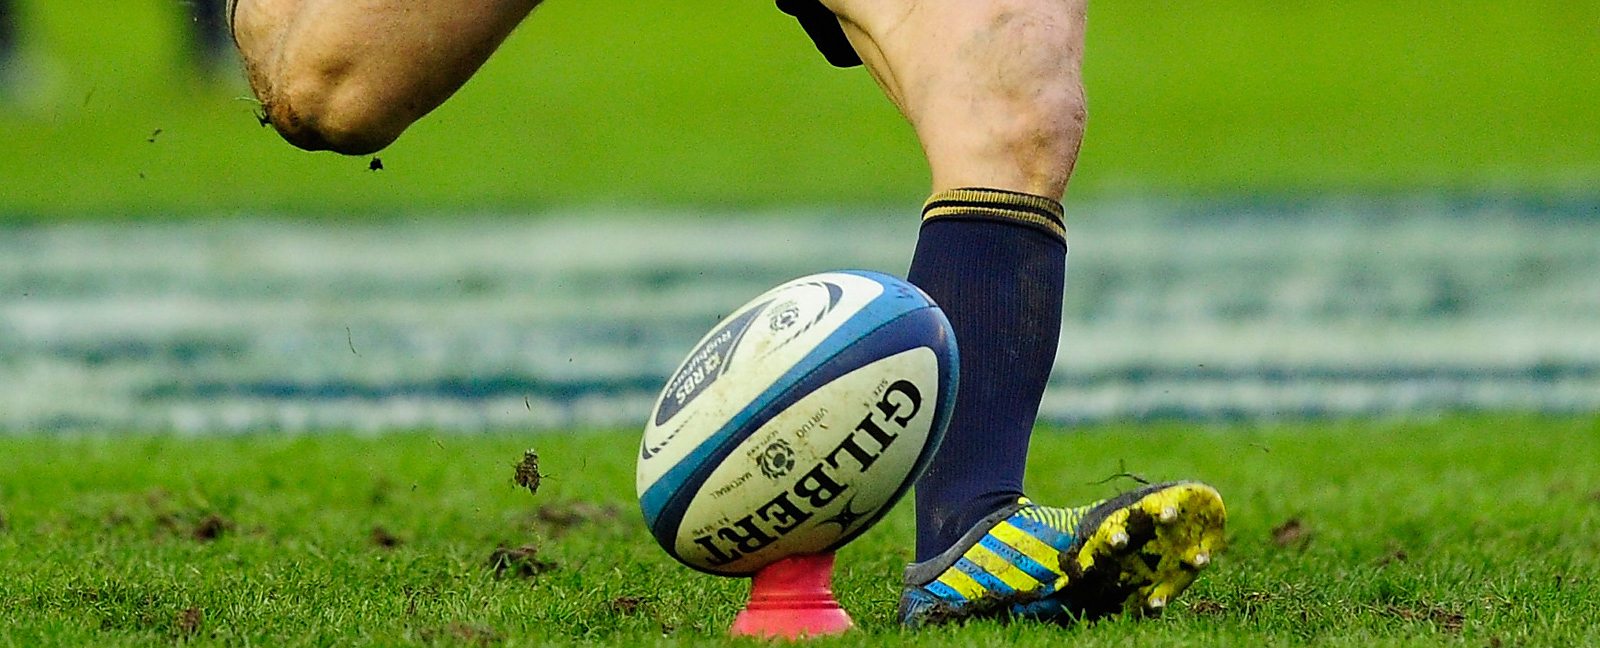 BBC iWonder What's the secret behind the perfect rugby kick?